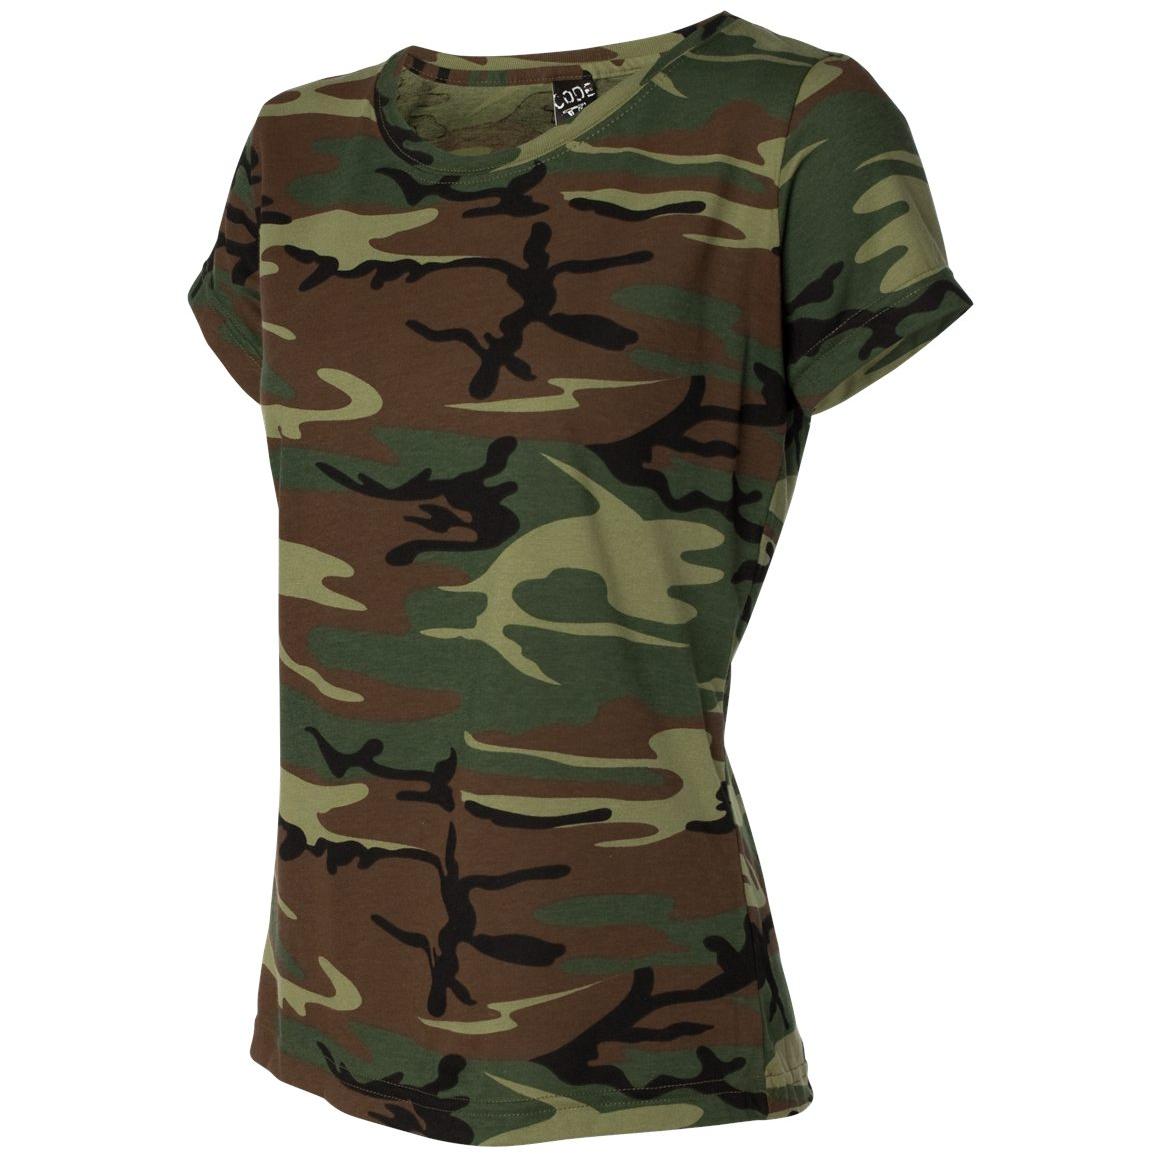 Ladies Cut Army Camo Tee Shirts From Southern Sisters Designs ...